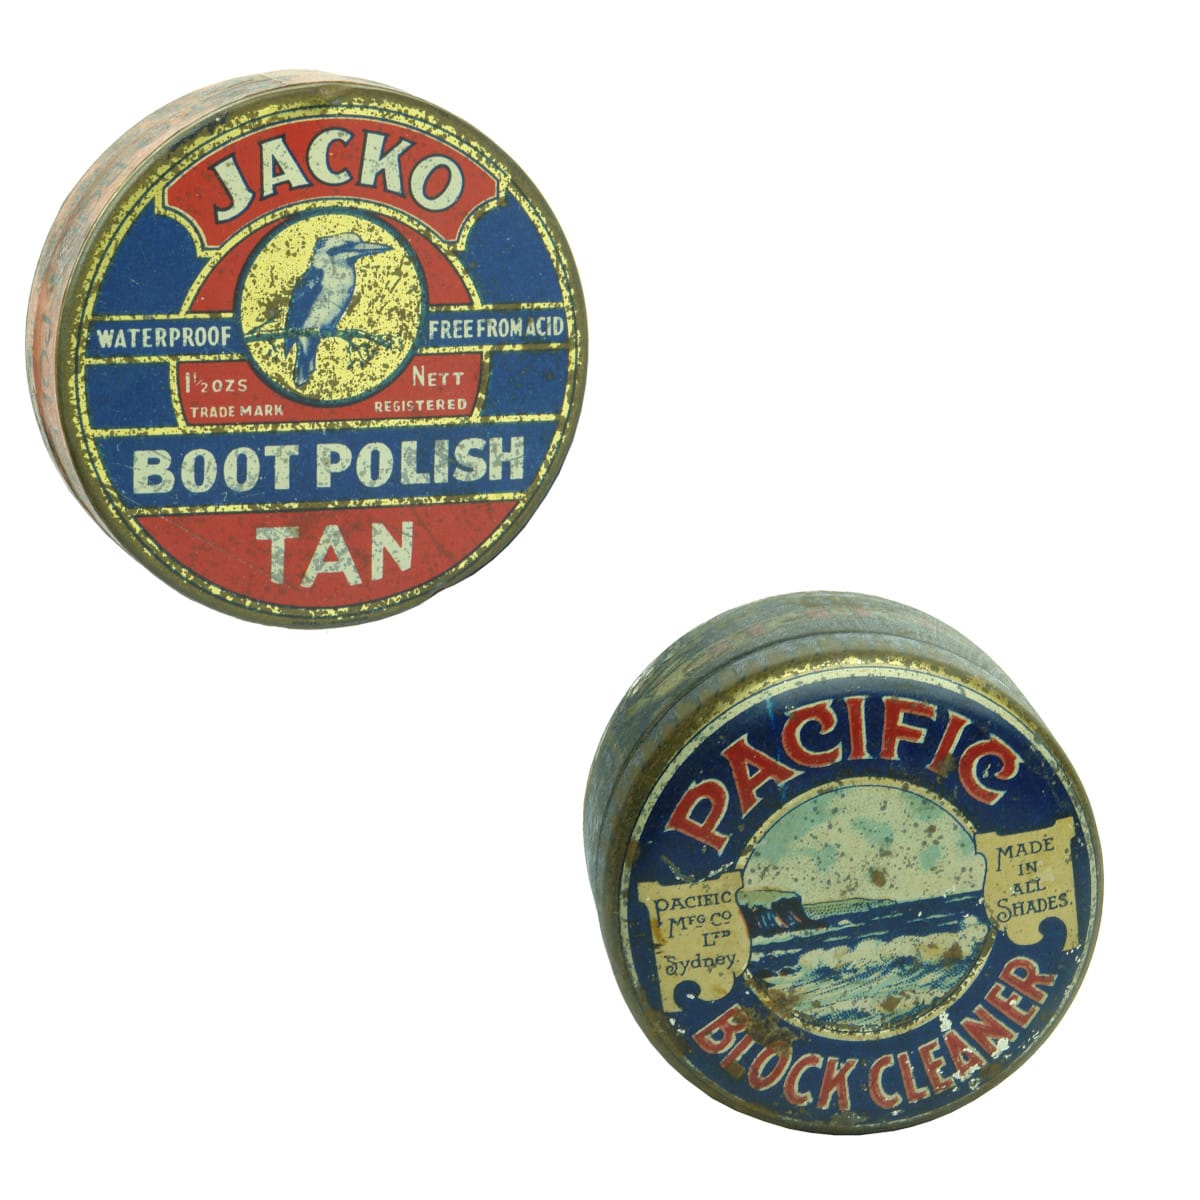 2 Tins: Jacko Boot Polish and Pacific Block Cleaner.